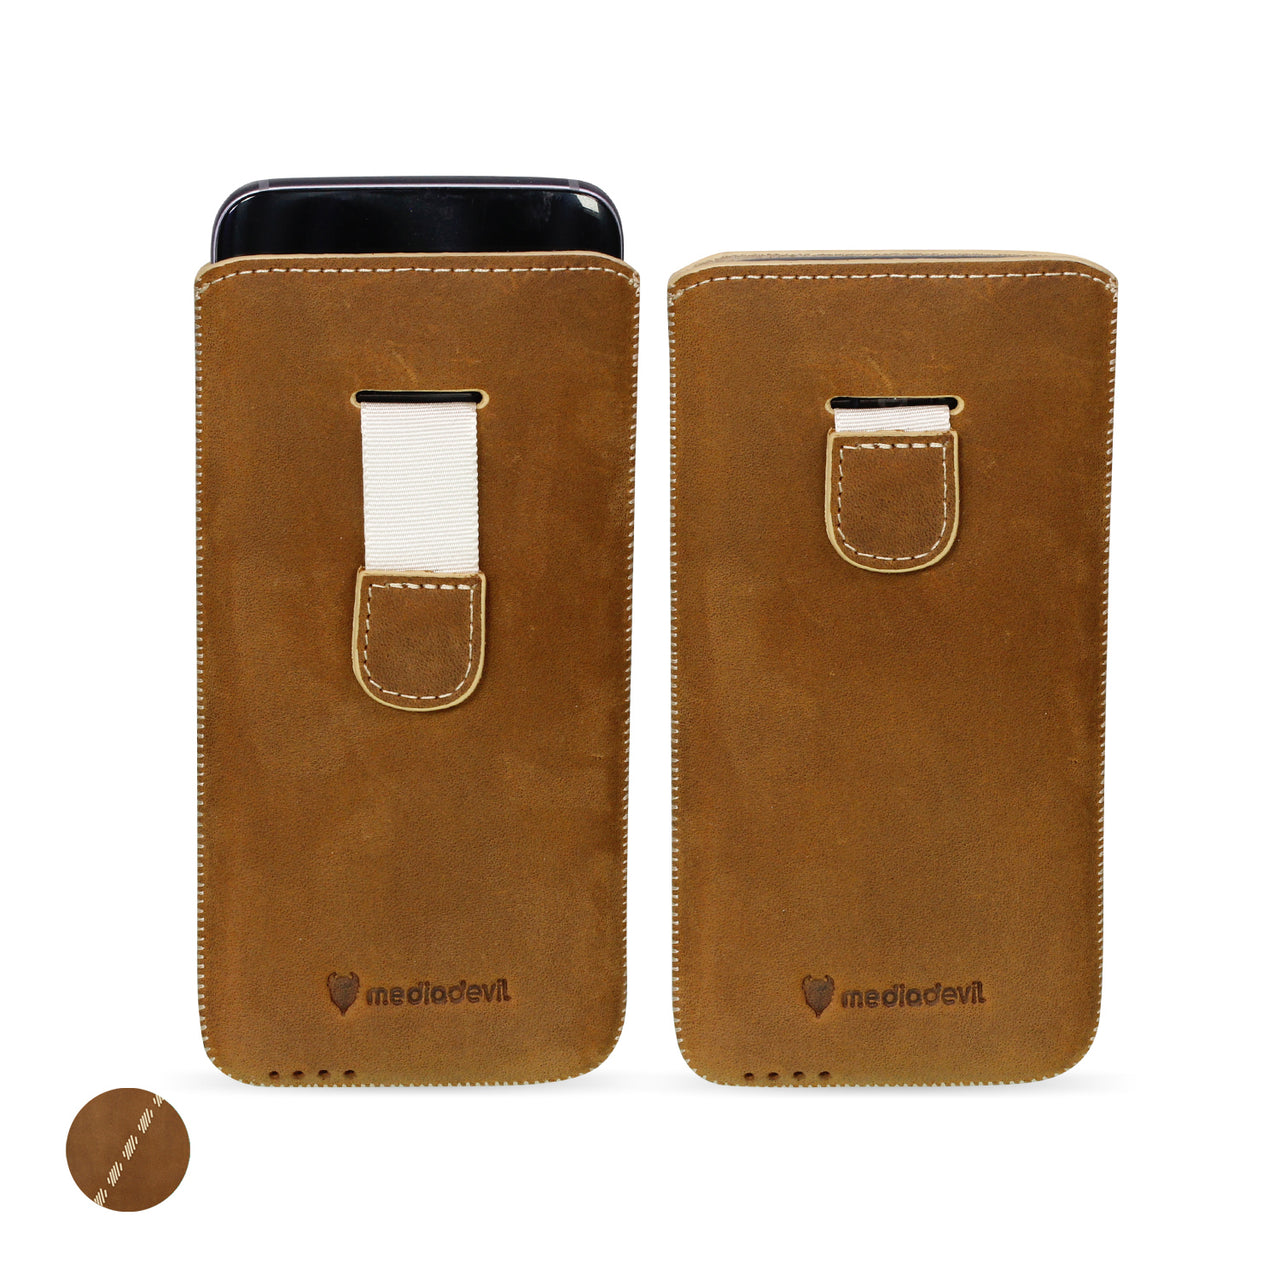 Nokia 8 (2017) Genuine Leather Pouch Sleeve Case | Artisanpouch